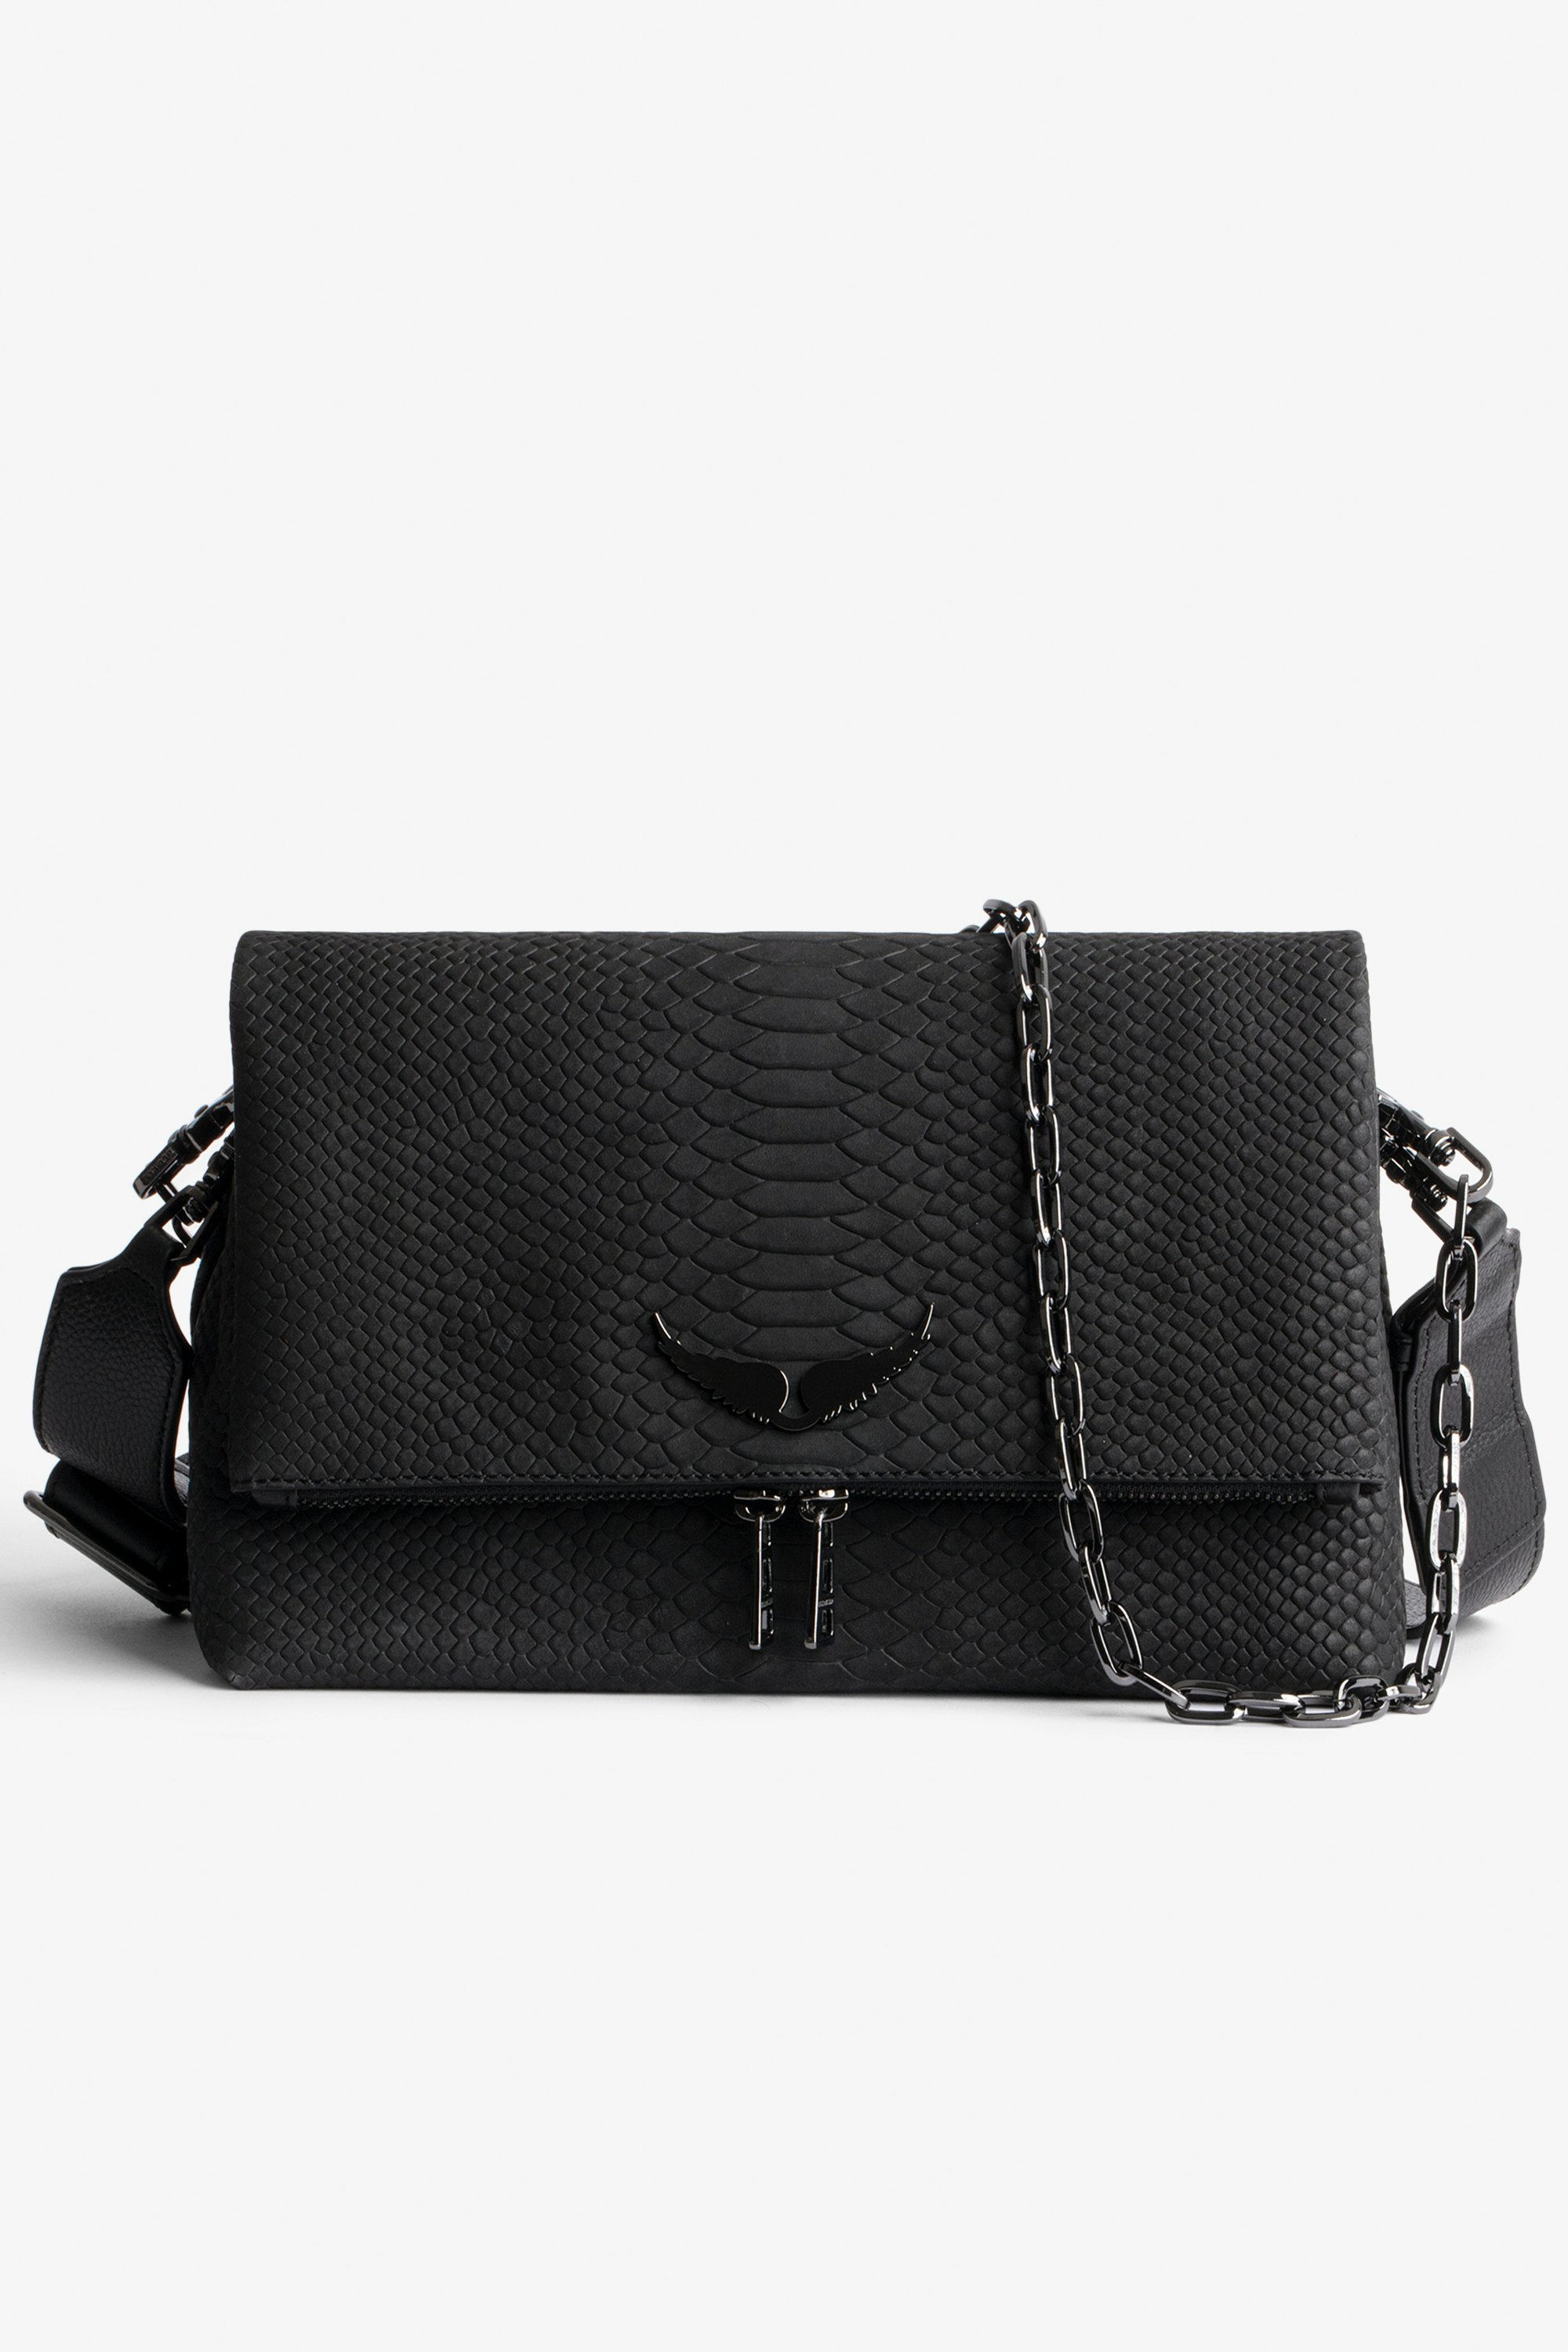 Soft Savage Rocky Bag - Women’s bag in black python-effect leather with a chain shoulder strap